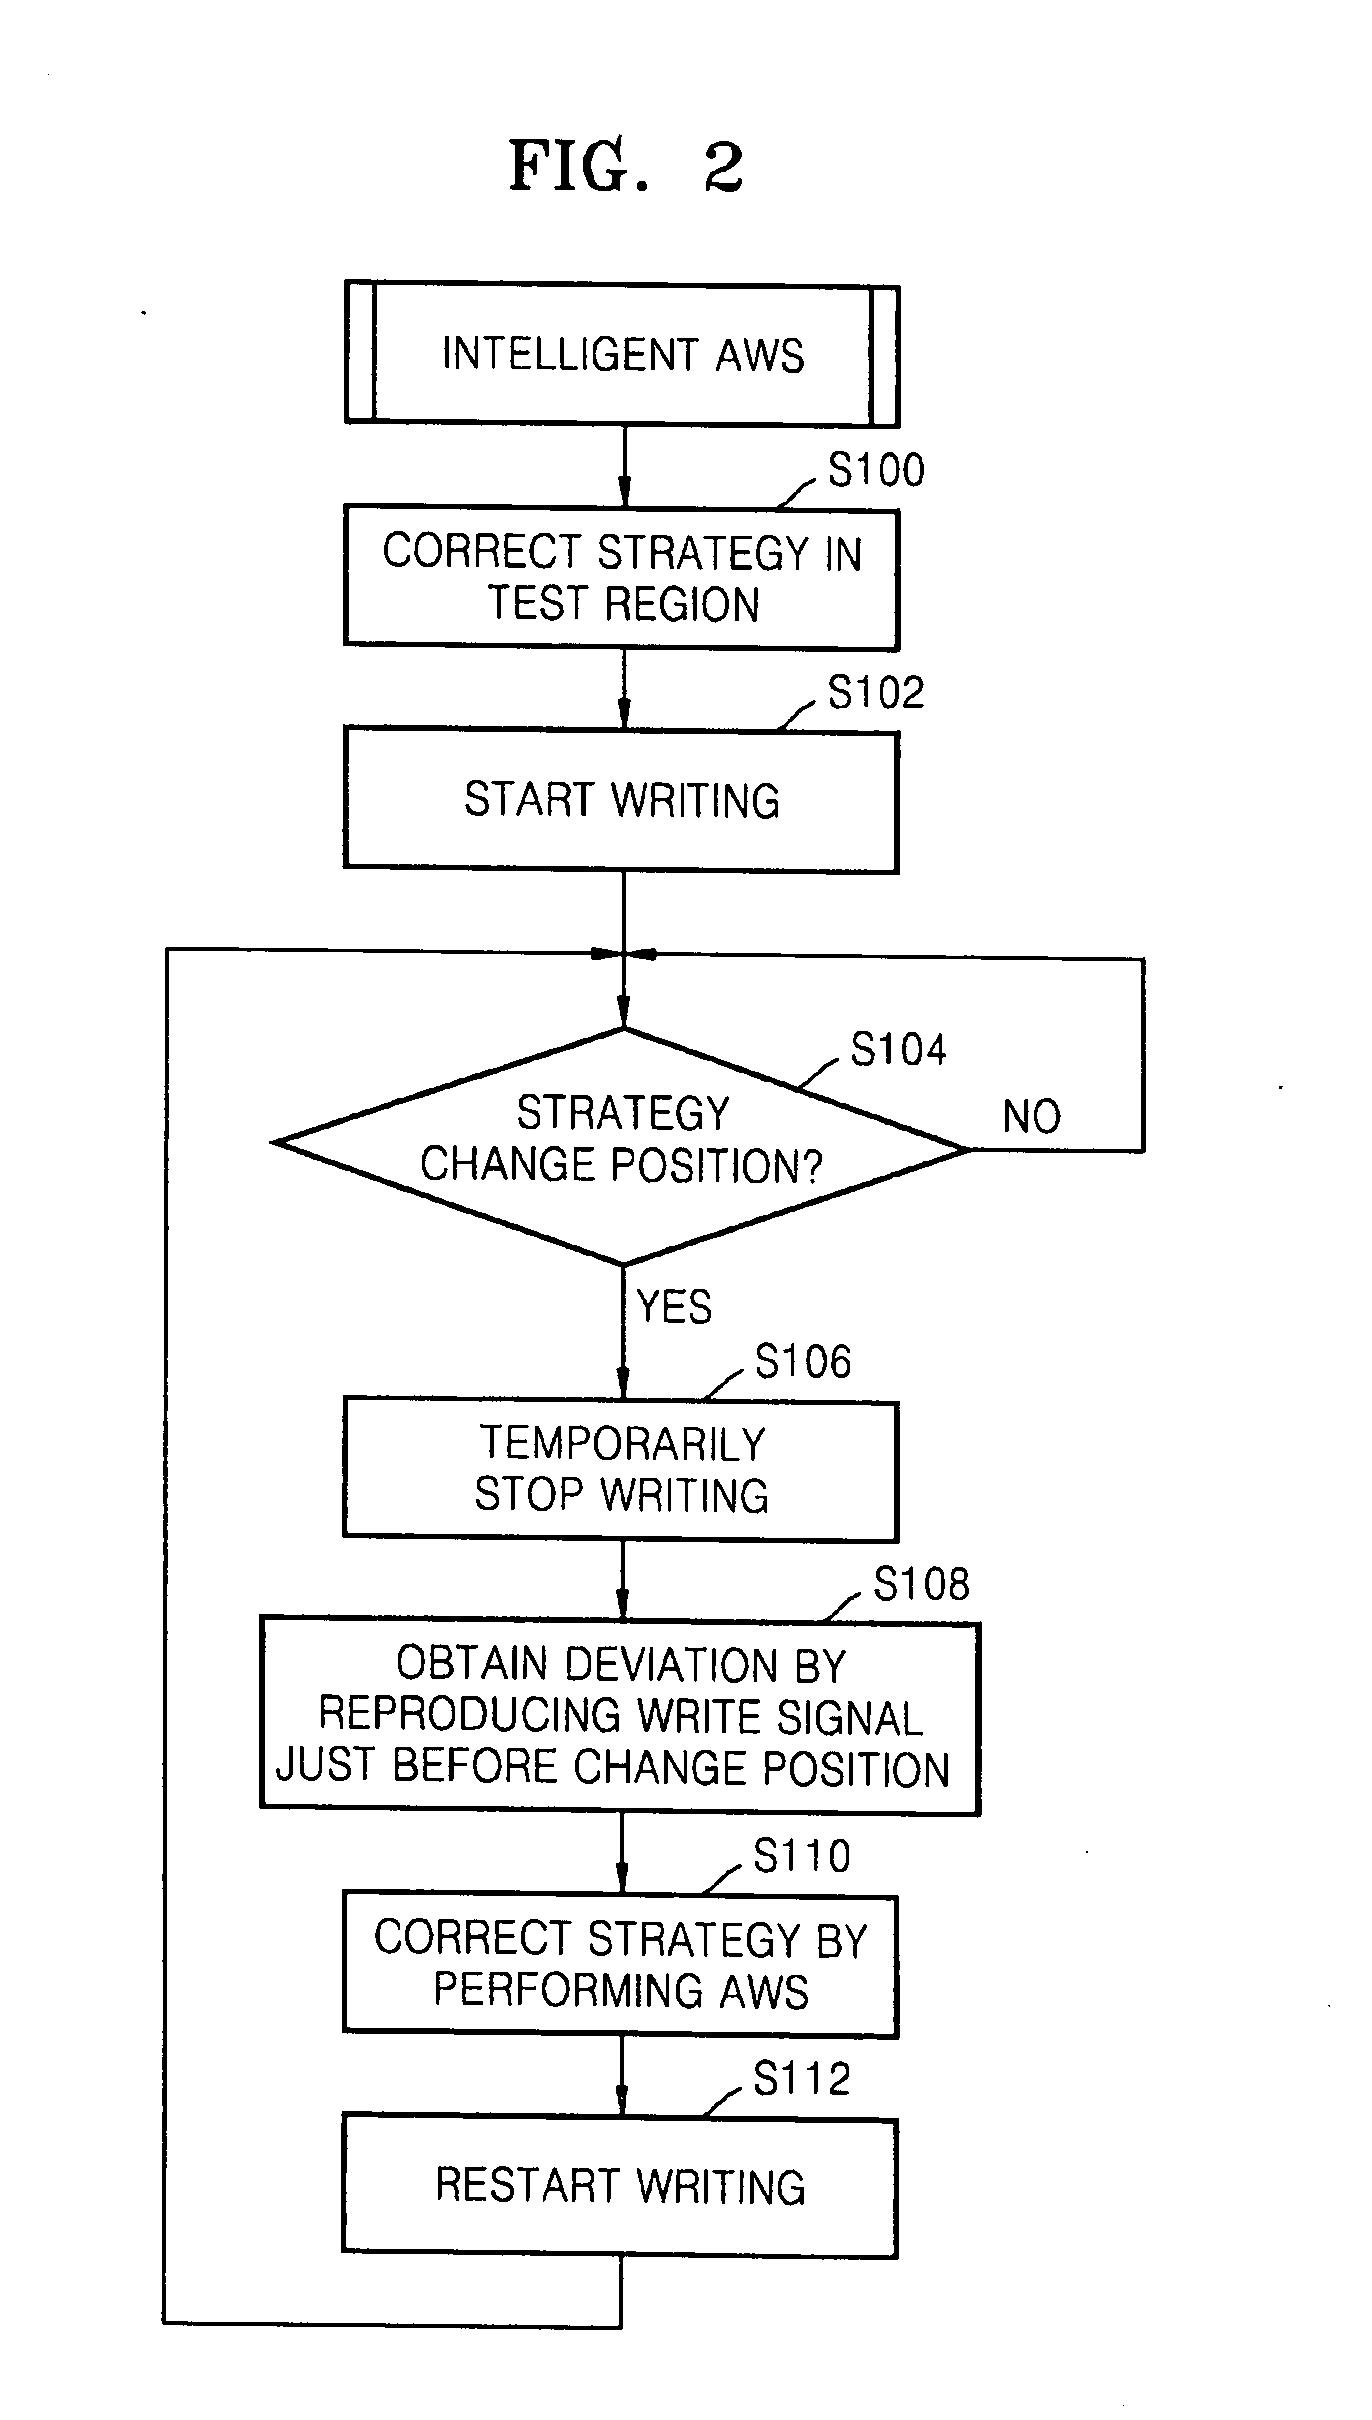 Optical disc apparatus and method of writing information to an optical disc